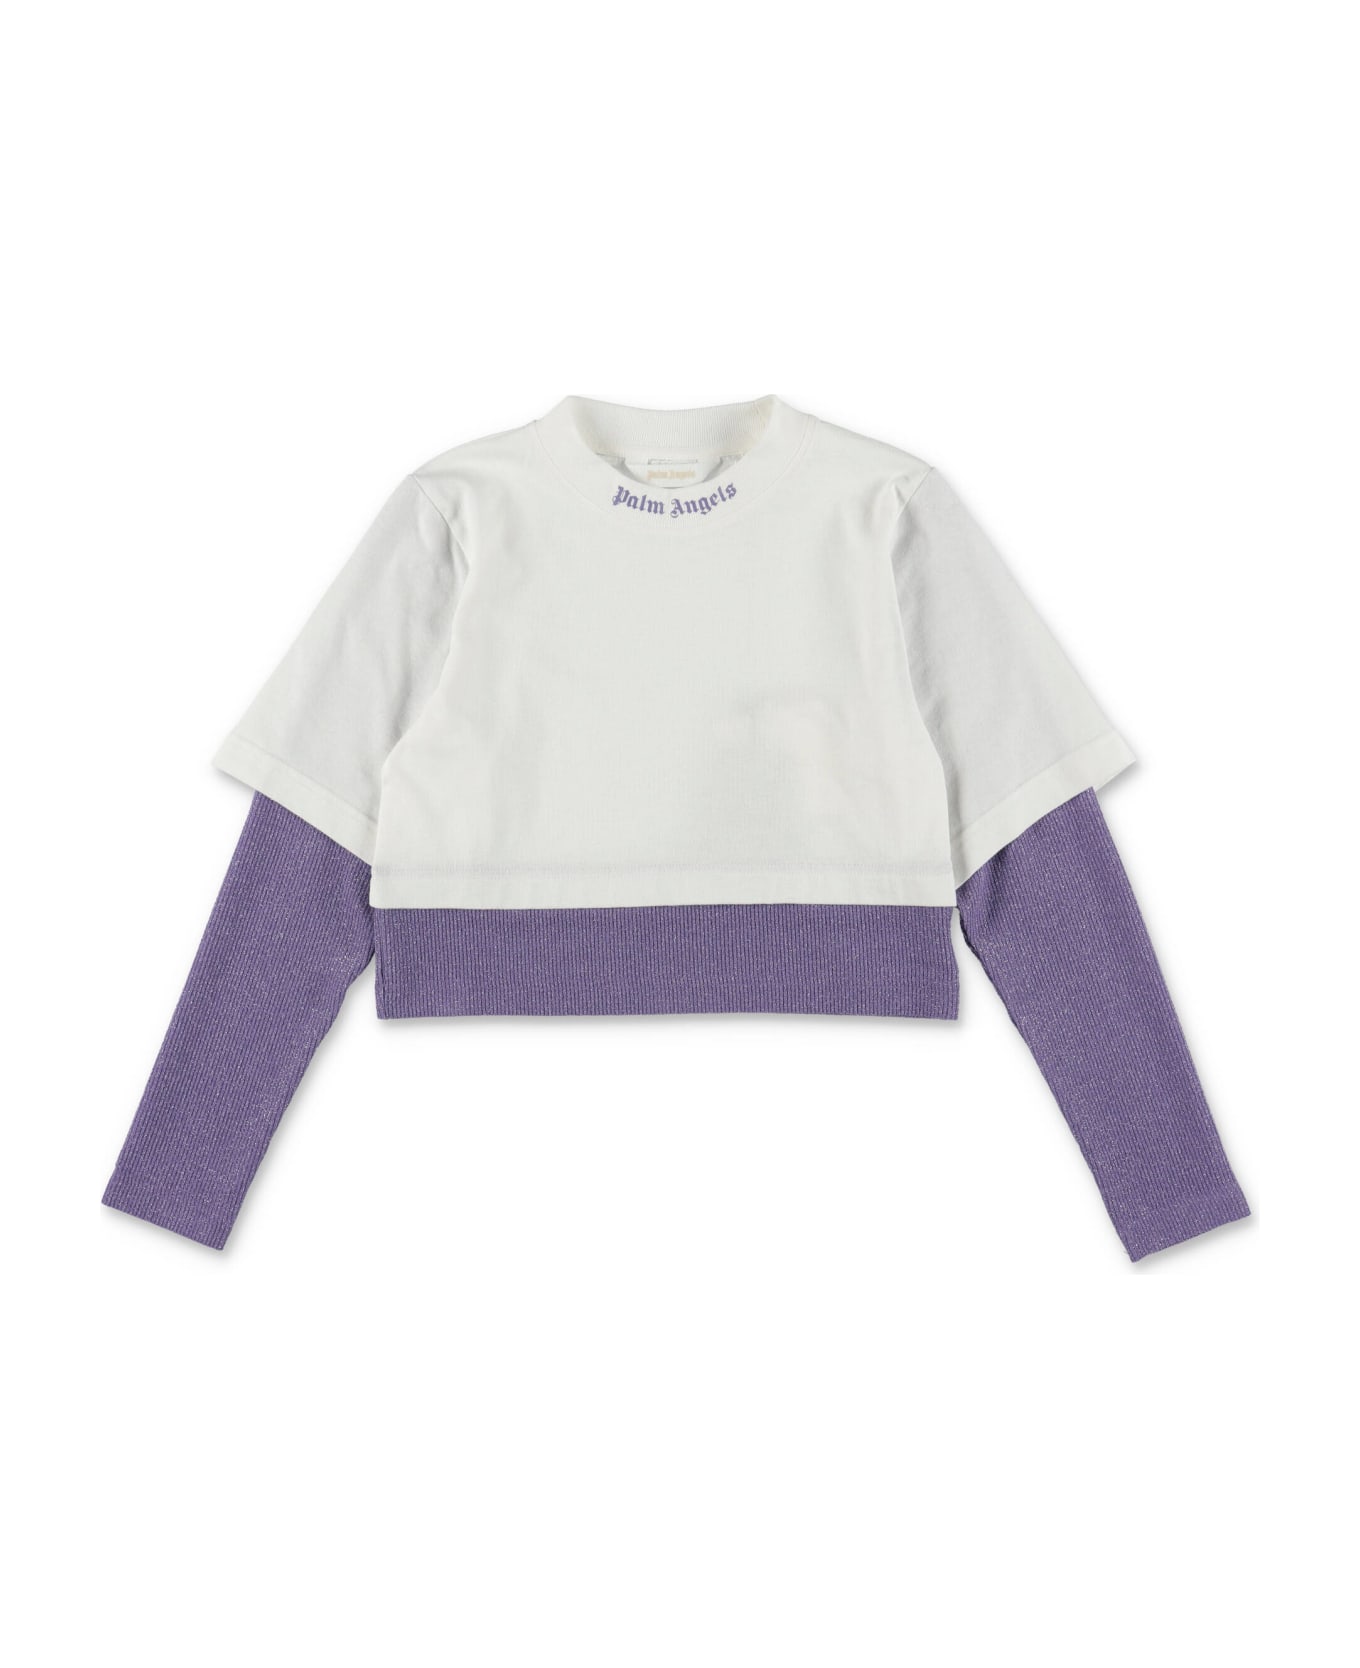 Palm Angels T-shirt Bianca Effetto Sovrapposto In Jersey Di Cotone Bambina - Bianco